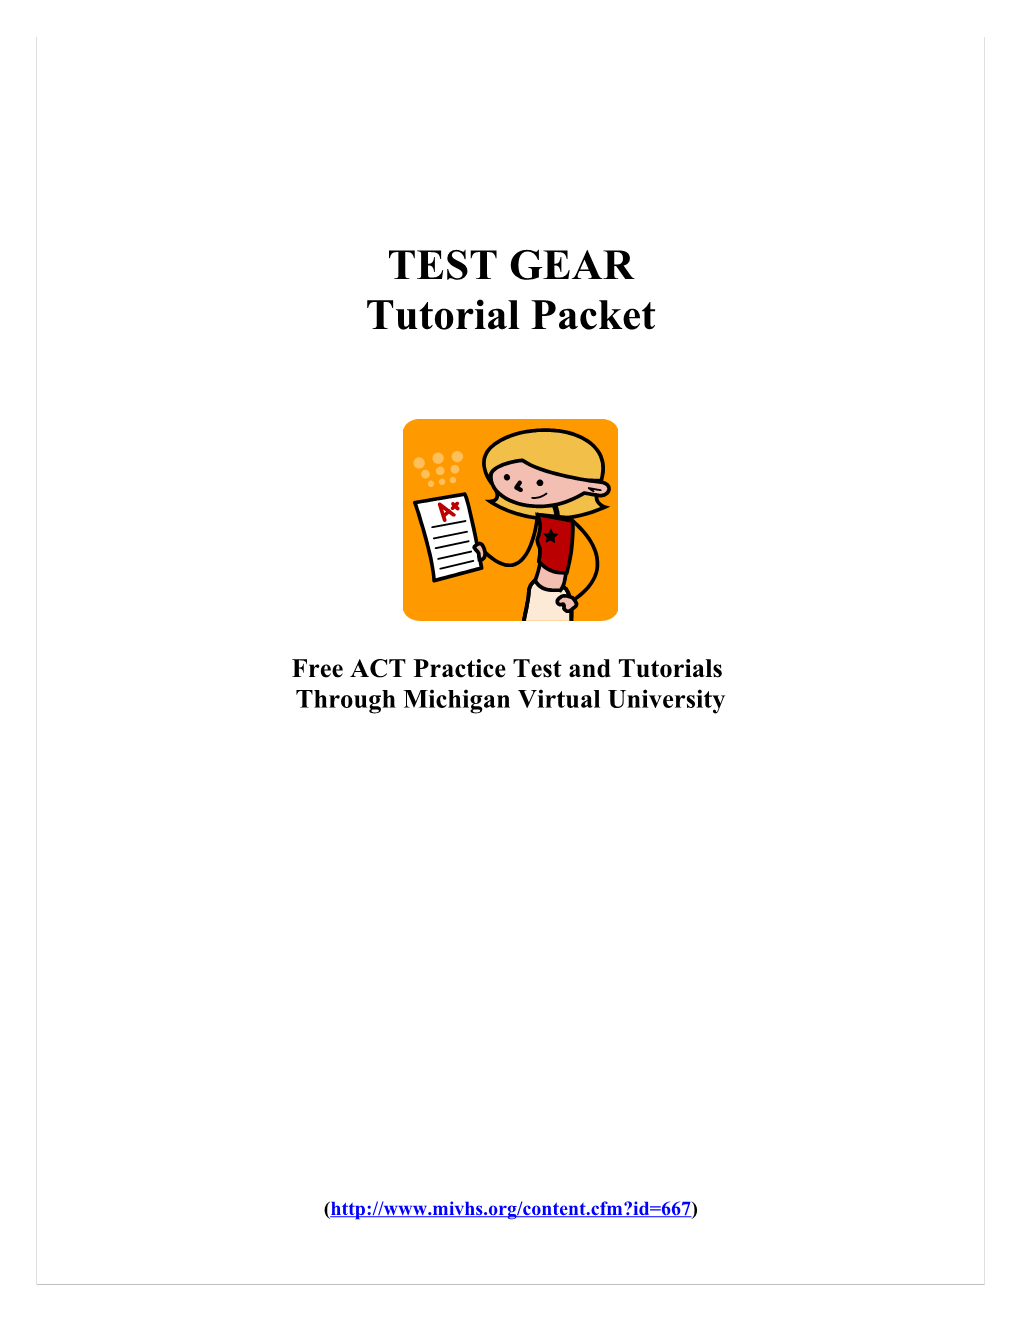 Free ACT Practice Test and Tutorials